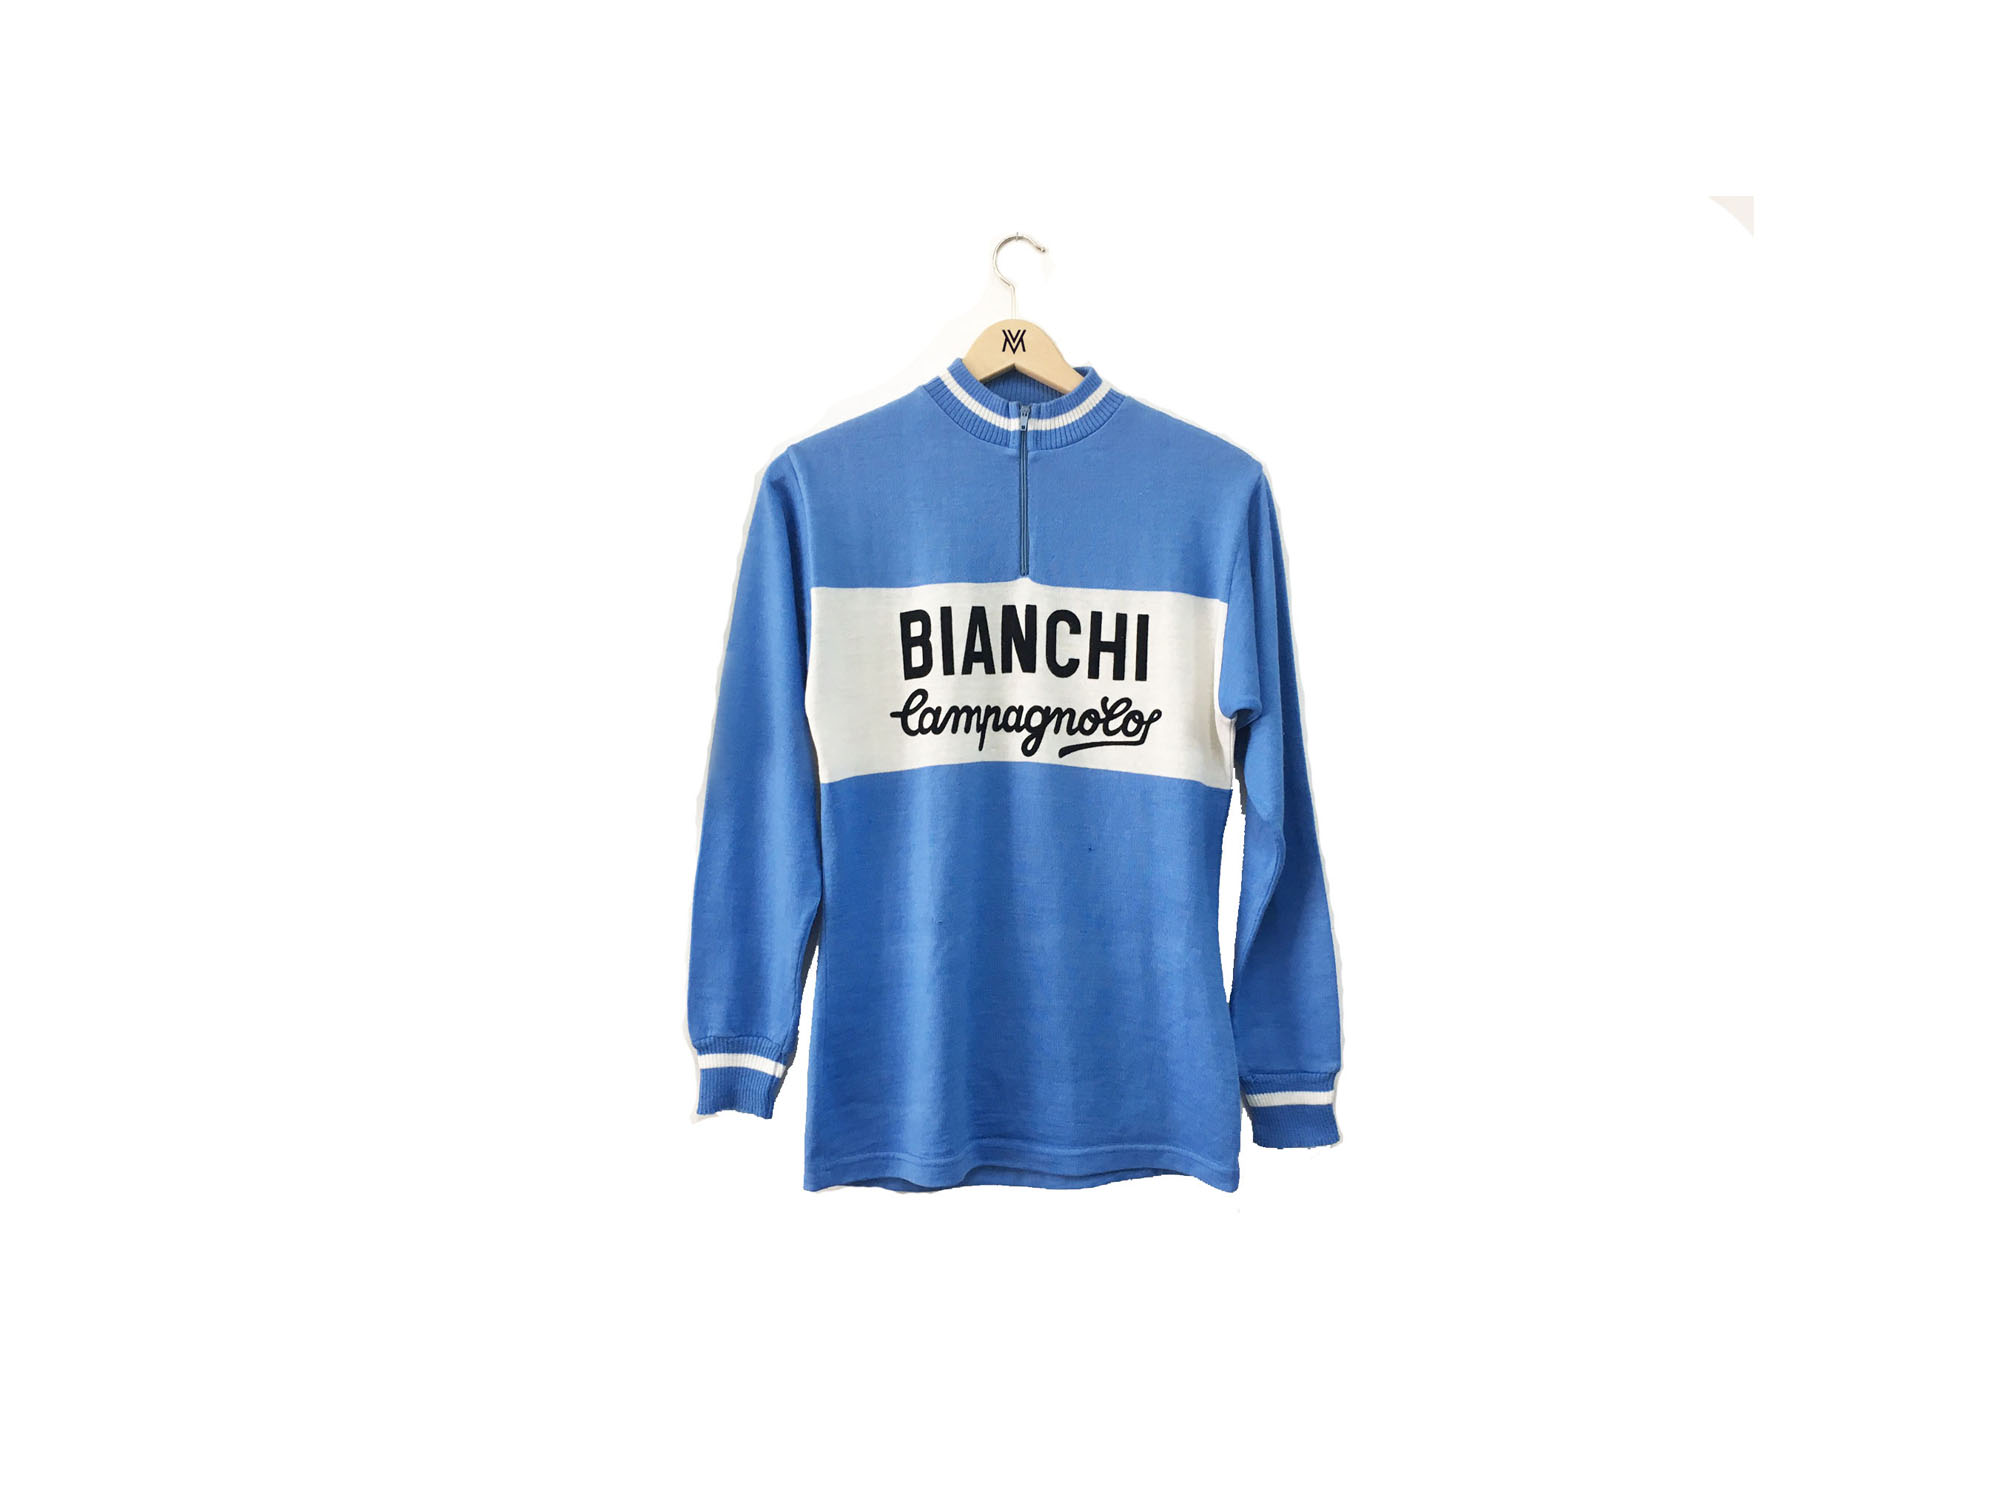 Bianchi Retro Jersey | peacecommission.kdsg.gov.ng